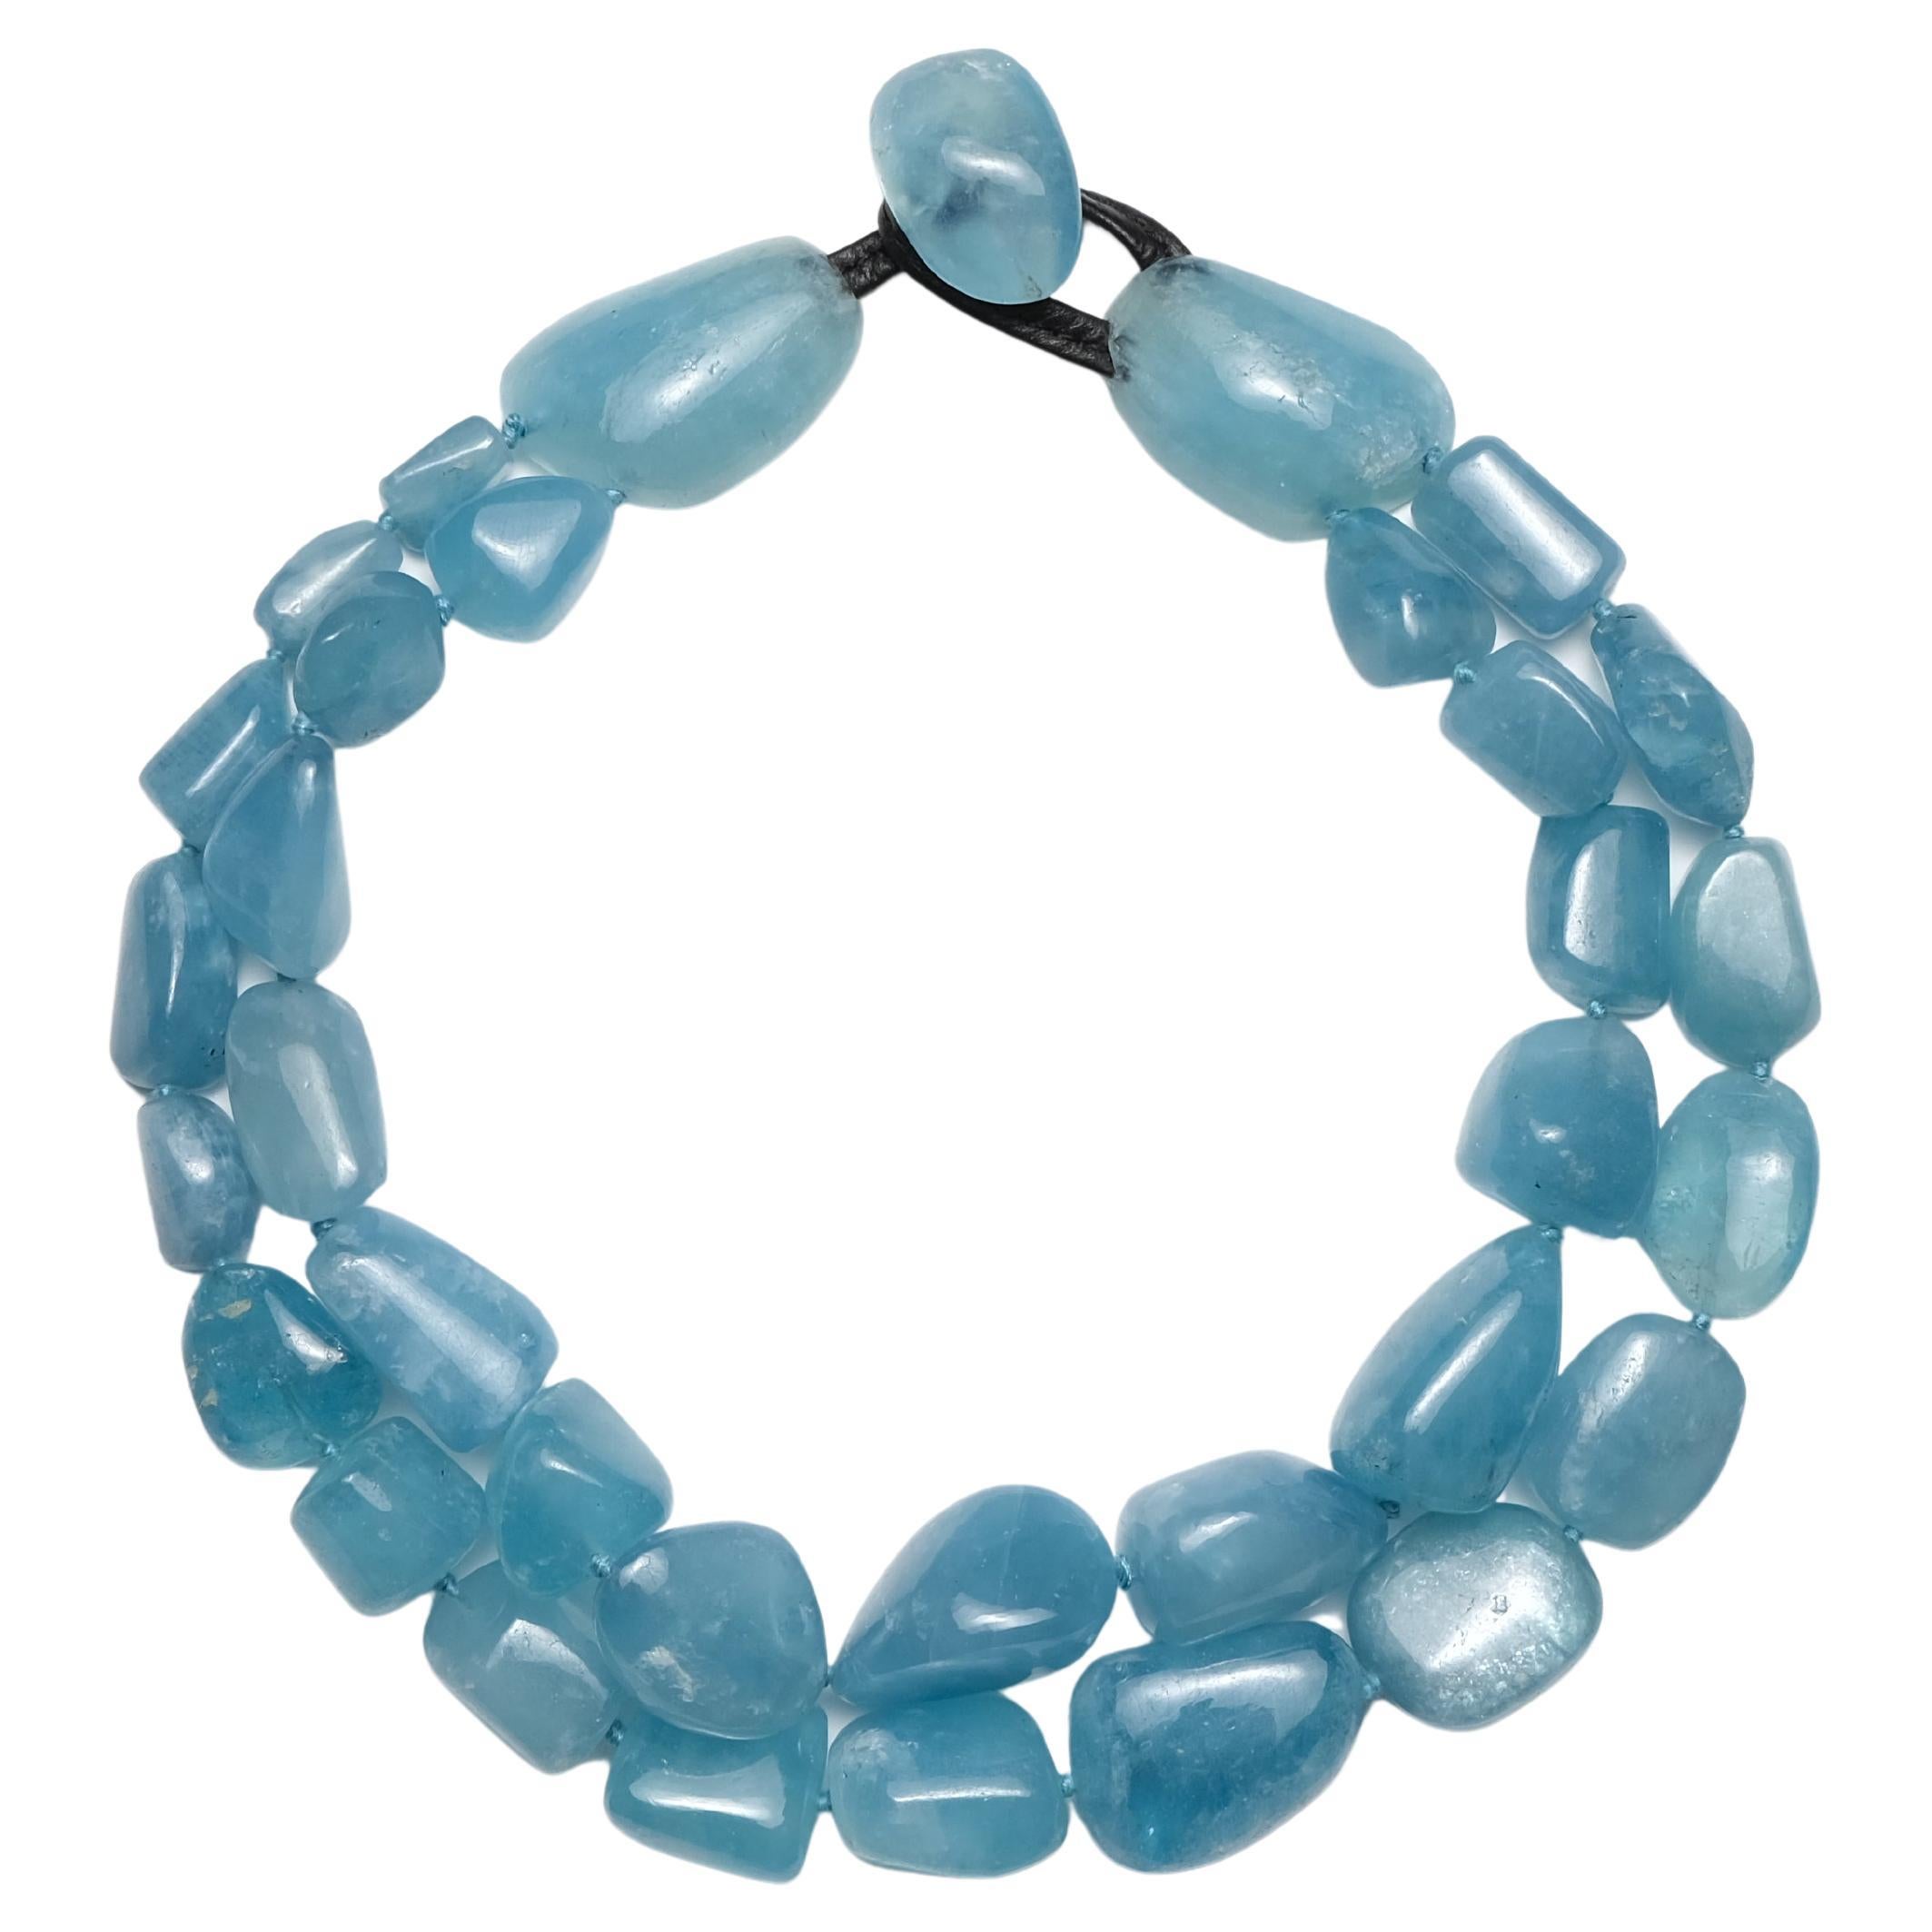 One-of-a-kind Necklace in Aquamarine from the Danish Brand Monies